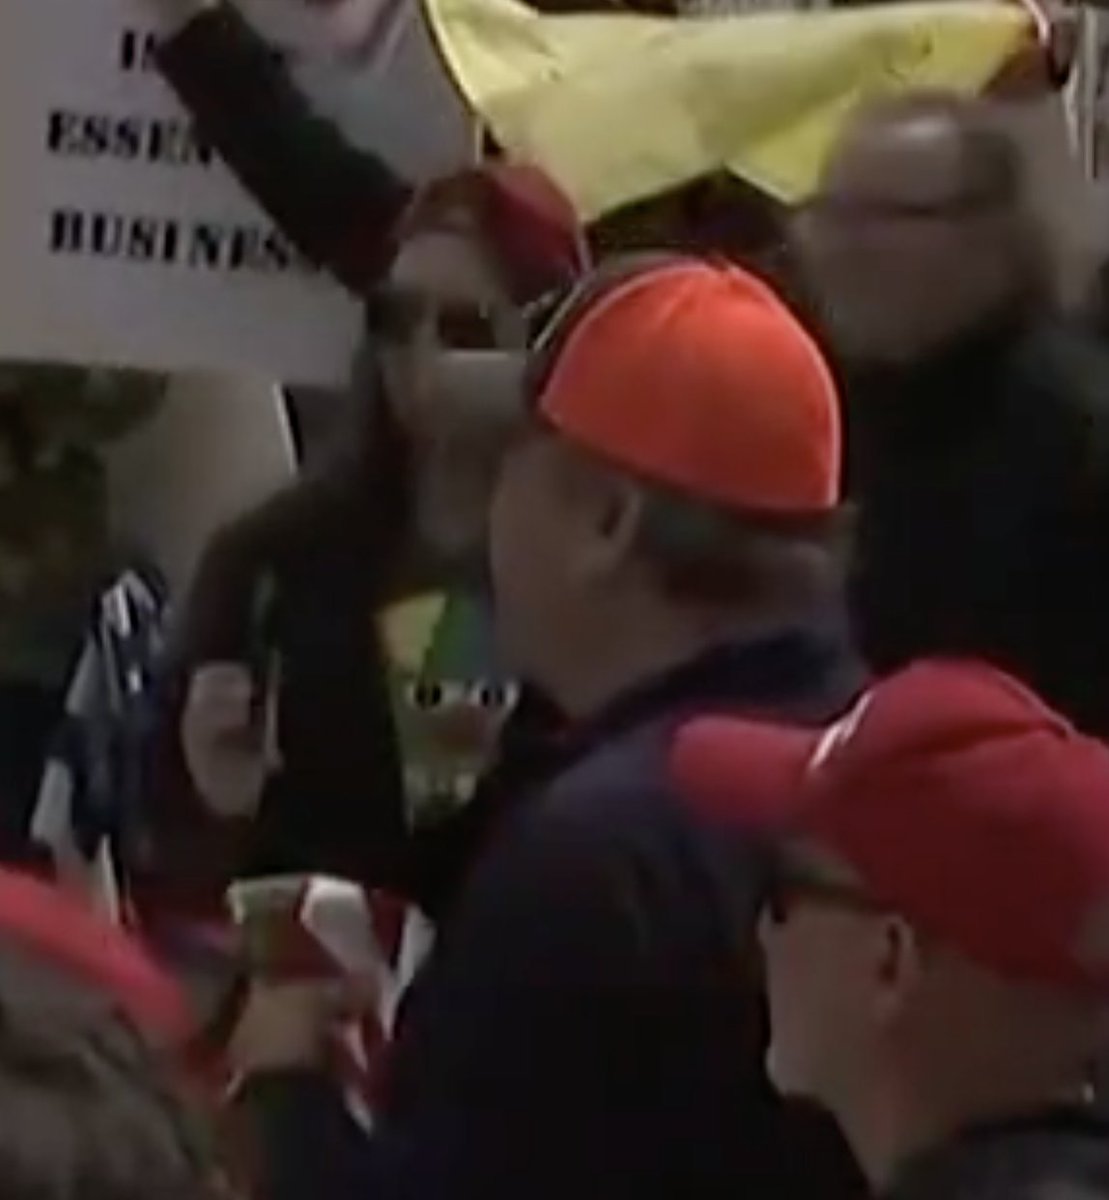 Remember what I said about the Heil Hitler Honkler?The clown pepe?If you check out the  @nowthisnews footage from the event, you'll find he made his own appearance at the event, in the form of this guy's t-shirt.